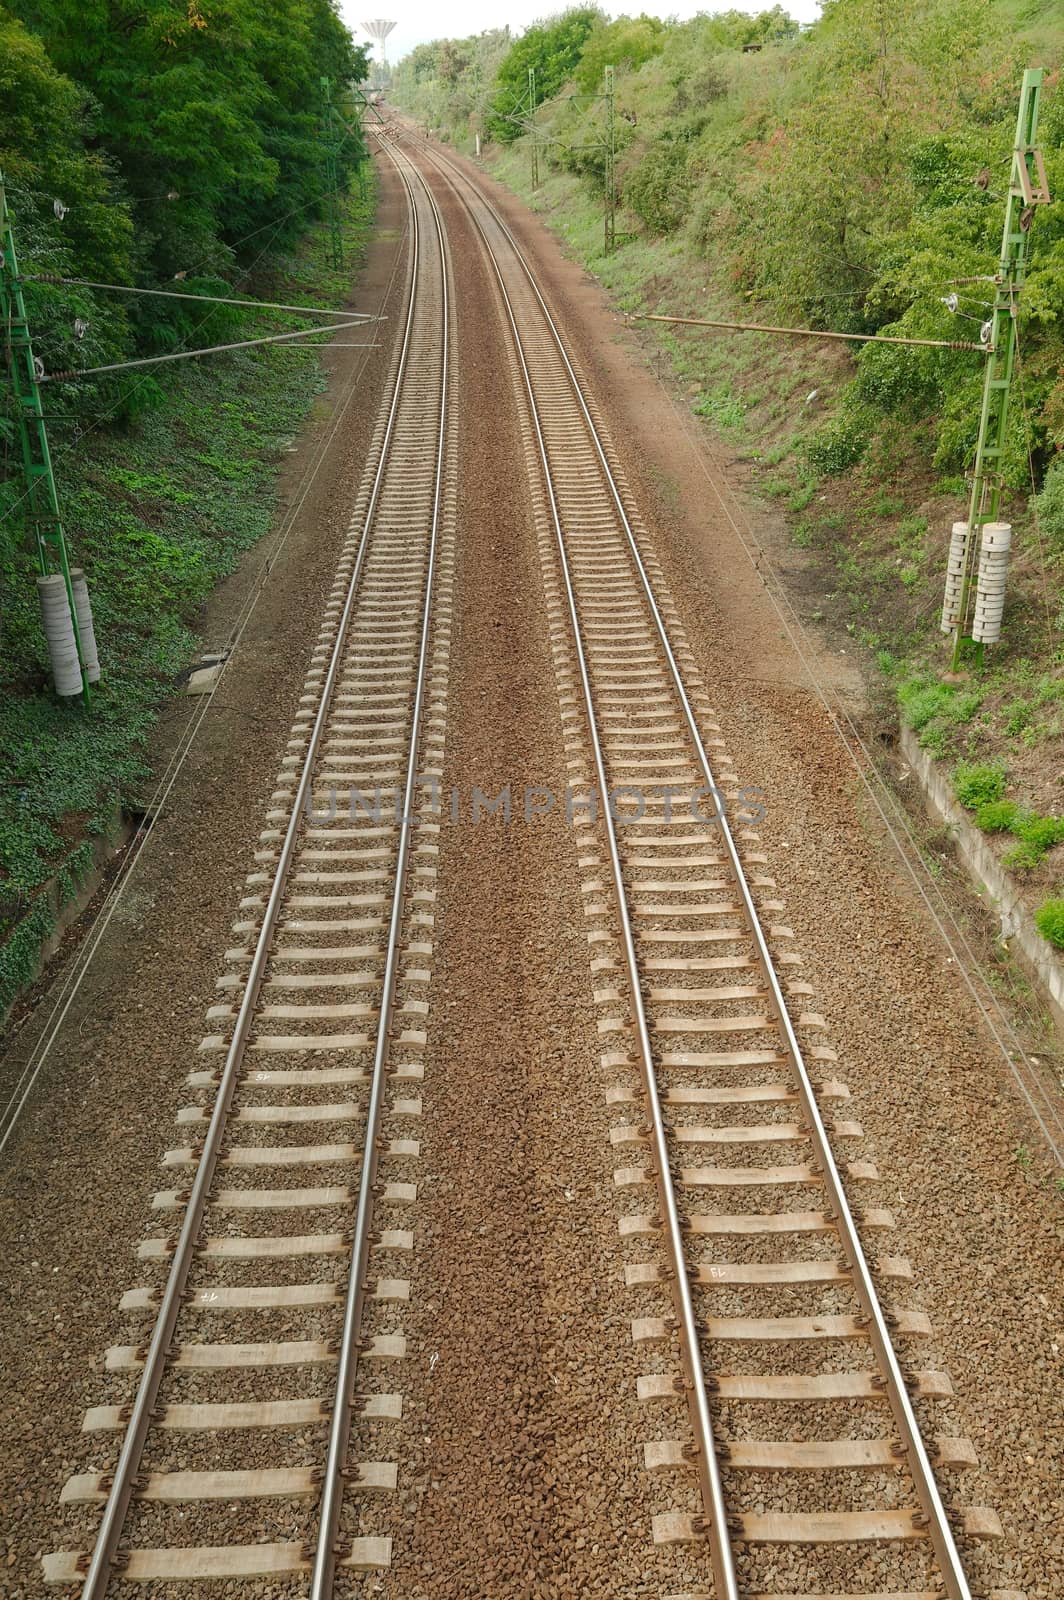 A pair of railway tracks viewed from above